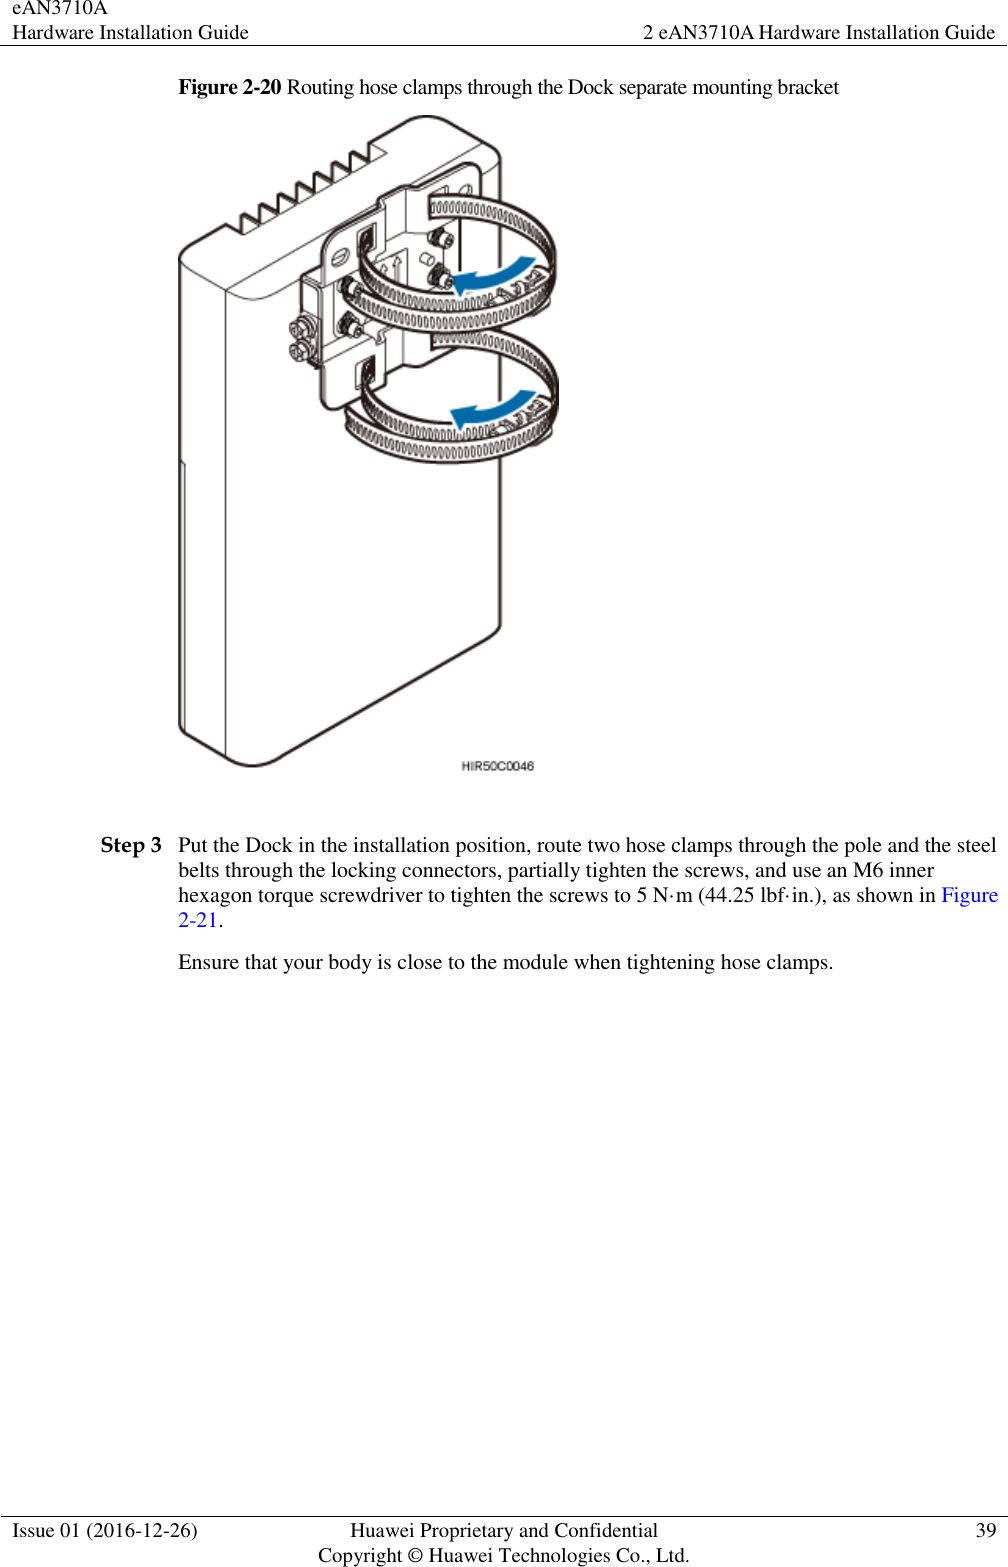 eAN3710A Hardware Installation Guide 2 eAN3710A Hardware Installation Guide  Issue 01 (2016-12-26) Huawei Proprietary and Confidential                                     Copyright © Huawei Technologies Co., Ltd. 39  Figure 2-20 Routing hose clamps through the Dock separate mounting bracket   Step 3 Put the Dock in the installation position, route two hose clamps through the pole and the steel belts through the locking connectors, partially tighten the screws, and use an M6 inner hexagon torque screwdriver to tighten the screws to 5 N·m (44.25 lbf·in.), as shown in Figure 2-21. Ensure that your body is close to the module when tightening hose clamps. 